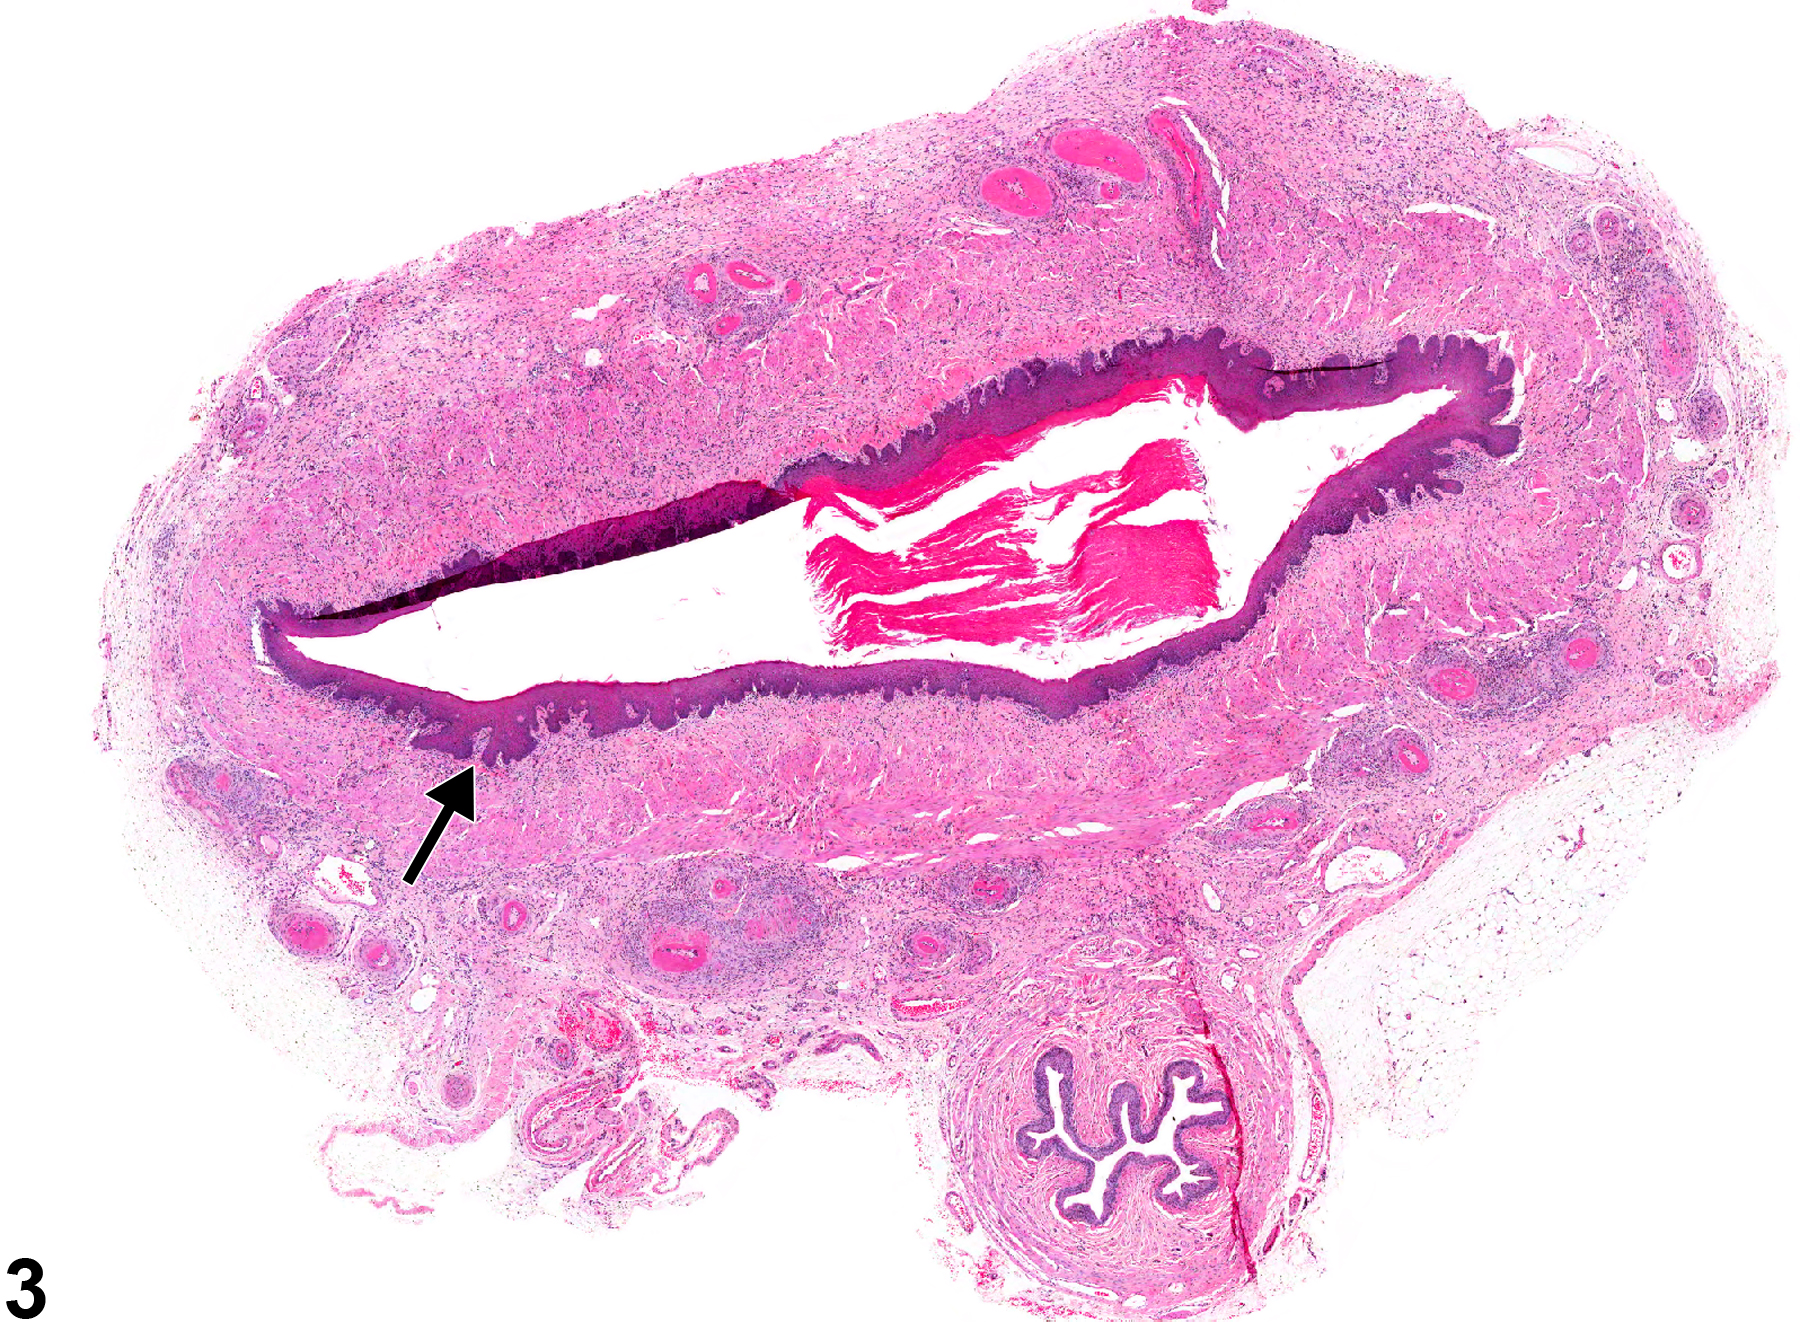 Image of hyperplasia in the vagina from a female Sprague-Dawley rat in a chronic study